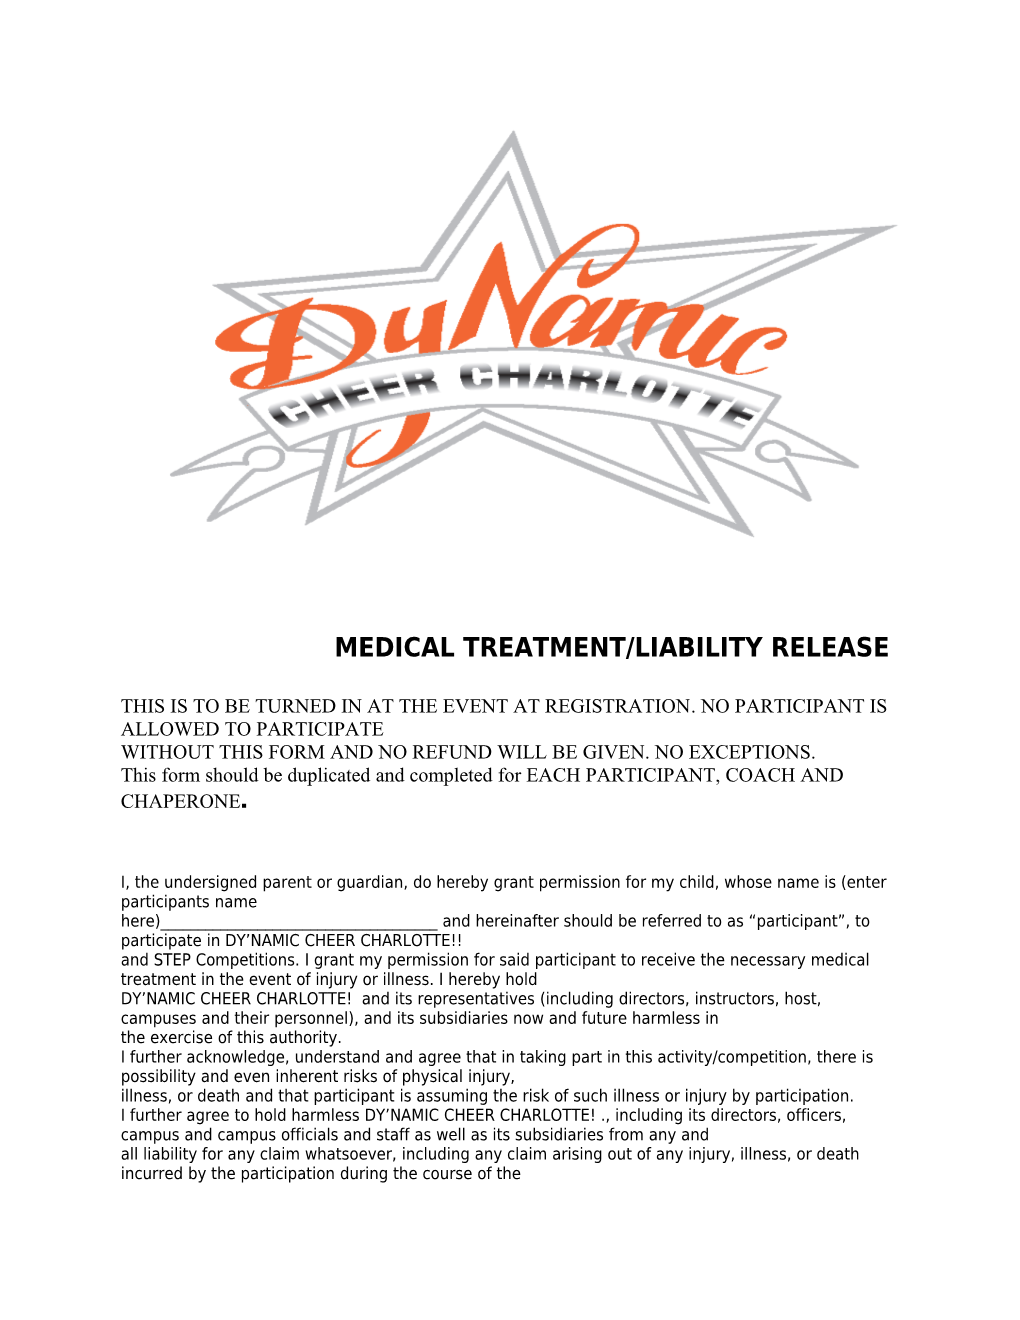 Medical Treatment/Liability Release